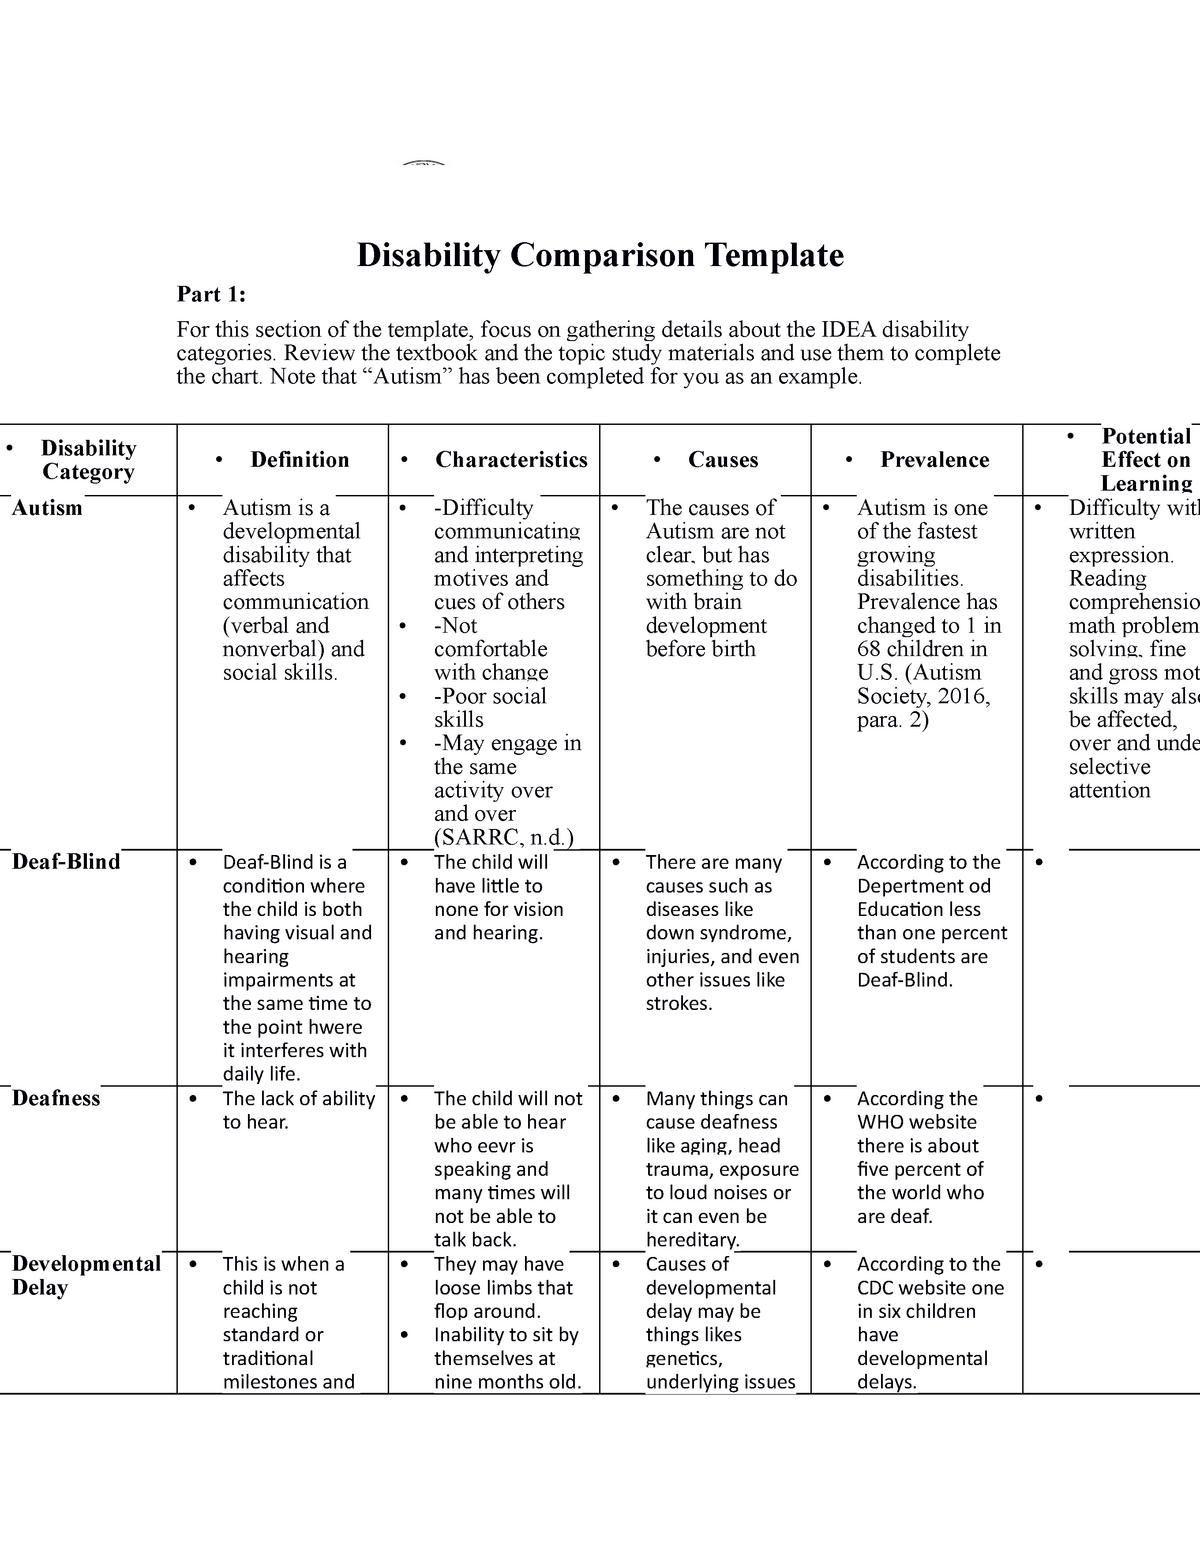 Dis week 3 assignment Disability Comparison Template Part 1 For